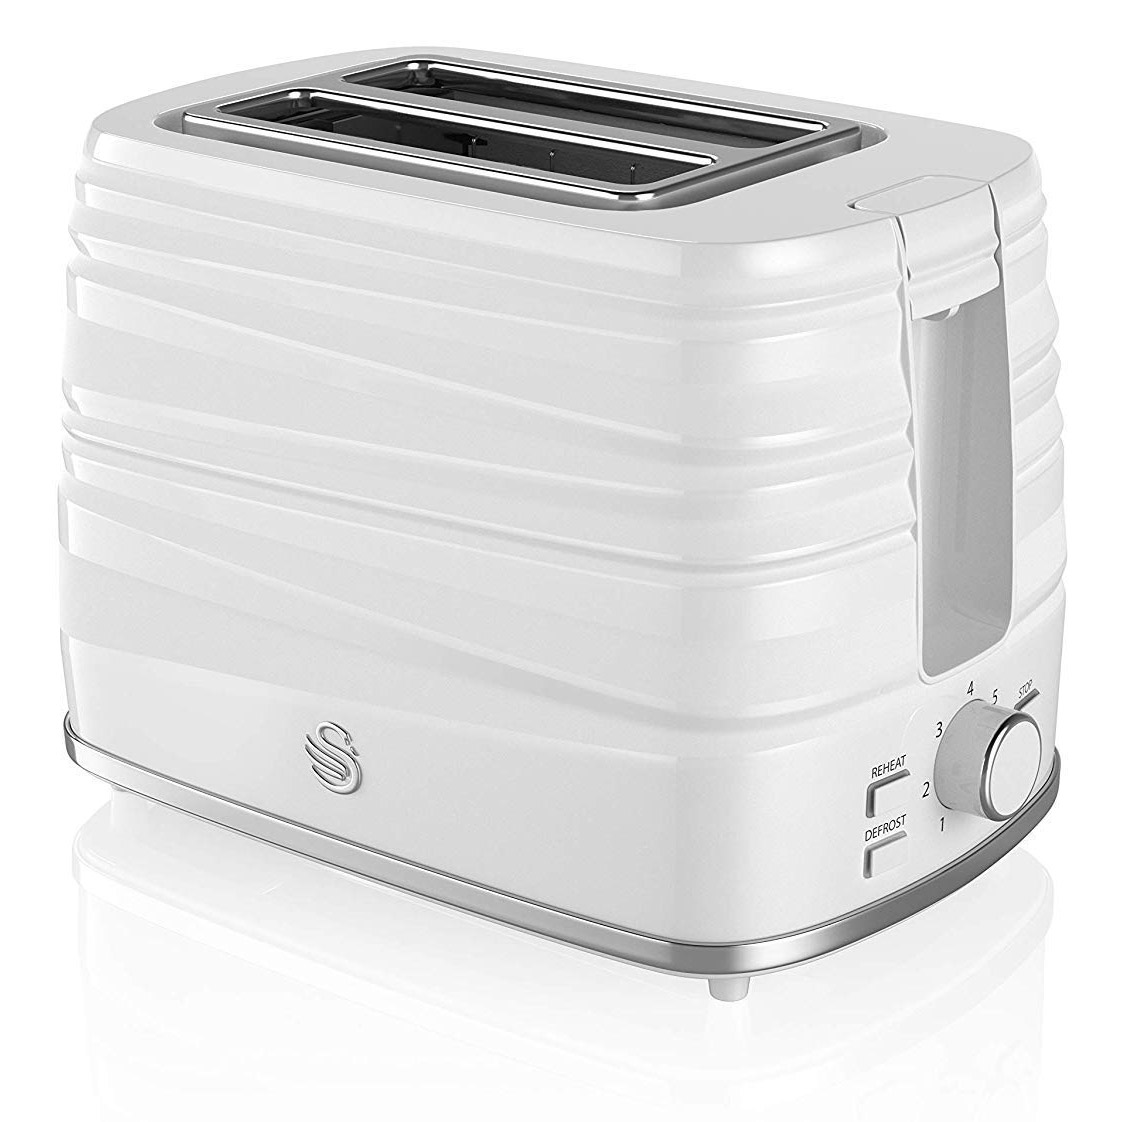 Image of Swan ST31050WN Symphony 2 Slice Toaster in White